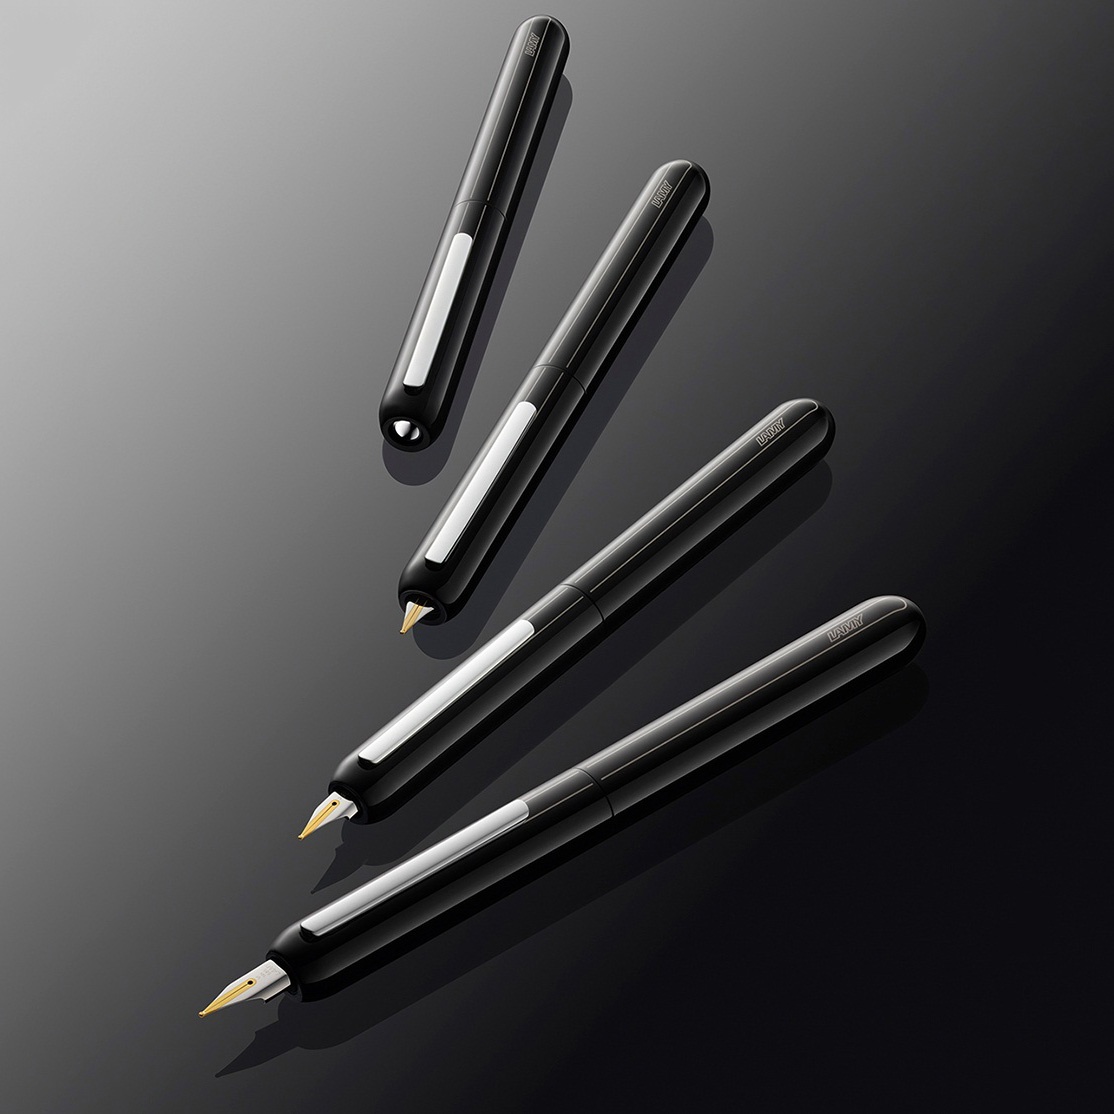 Dialog 3 Piano Black Fountain pen in the group Pens / Fine Writing / Gift Pens at Pen Store (102109_r)